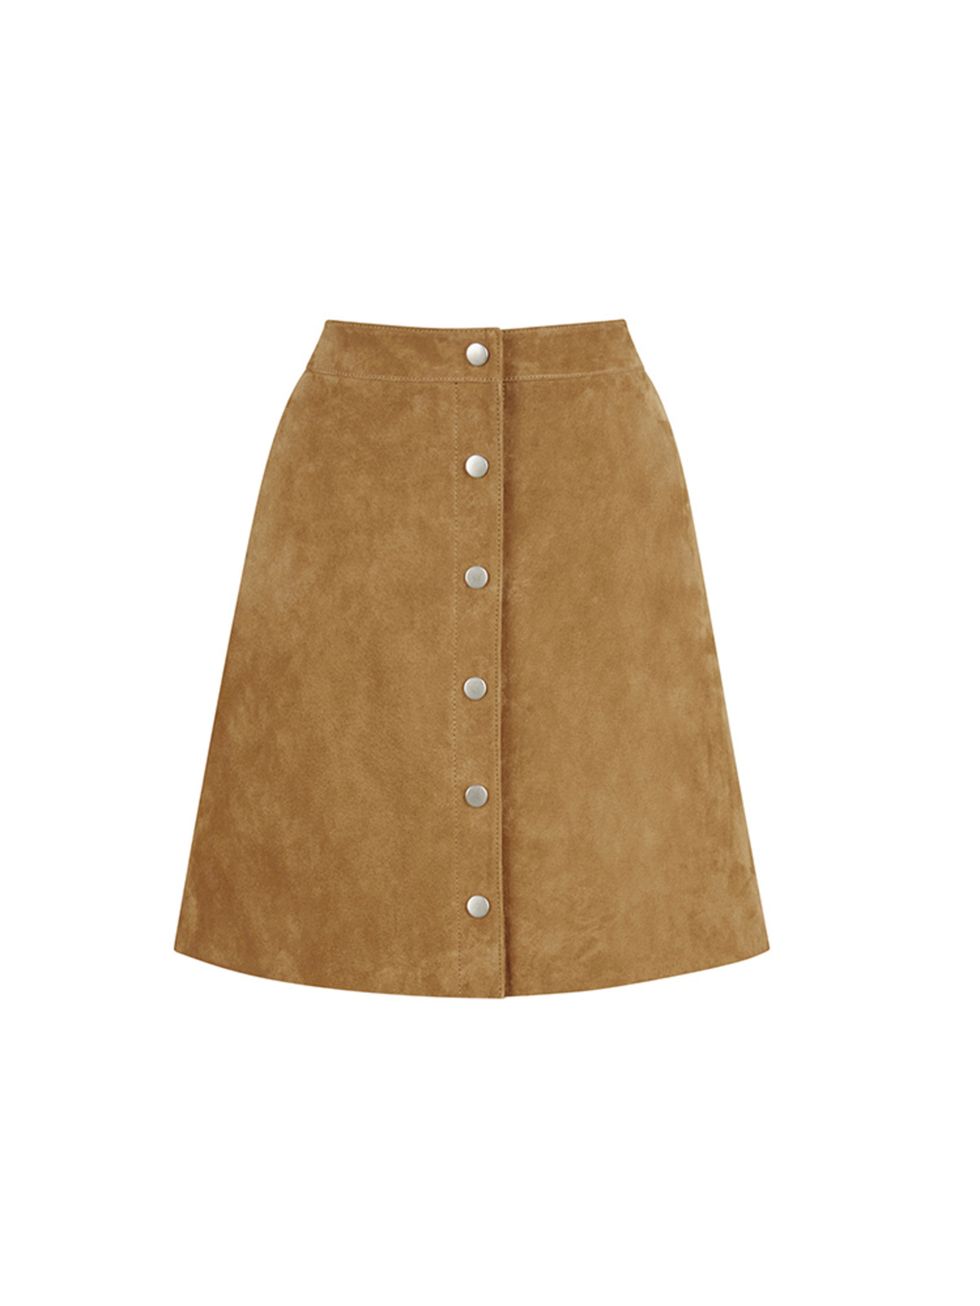 <p><a href="http://www.warehouse.co.uk/suede-a-line-skirt/skirts/warehouse/fcp-product/02370511?gclid=CKeOoejWpcYCFQzItAod1osKBg#fo_c=789&fo_k=24bcf3e1246a4a559749be7694a4e87c&fo_s=gplauk?cm_mmc=PPC-GGL-_-Search-_-PX-Shopping-Brand" target="_blank">Wareho